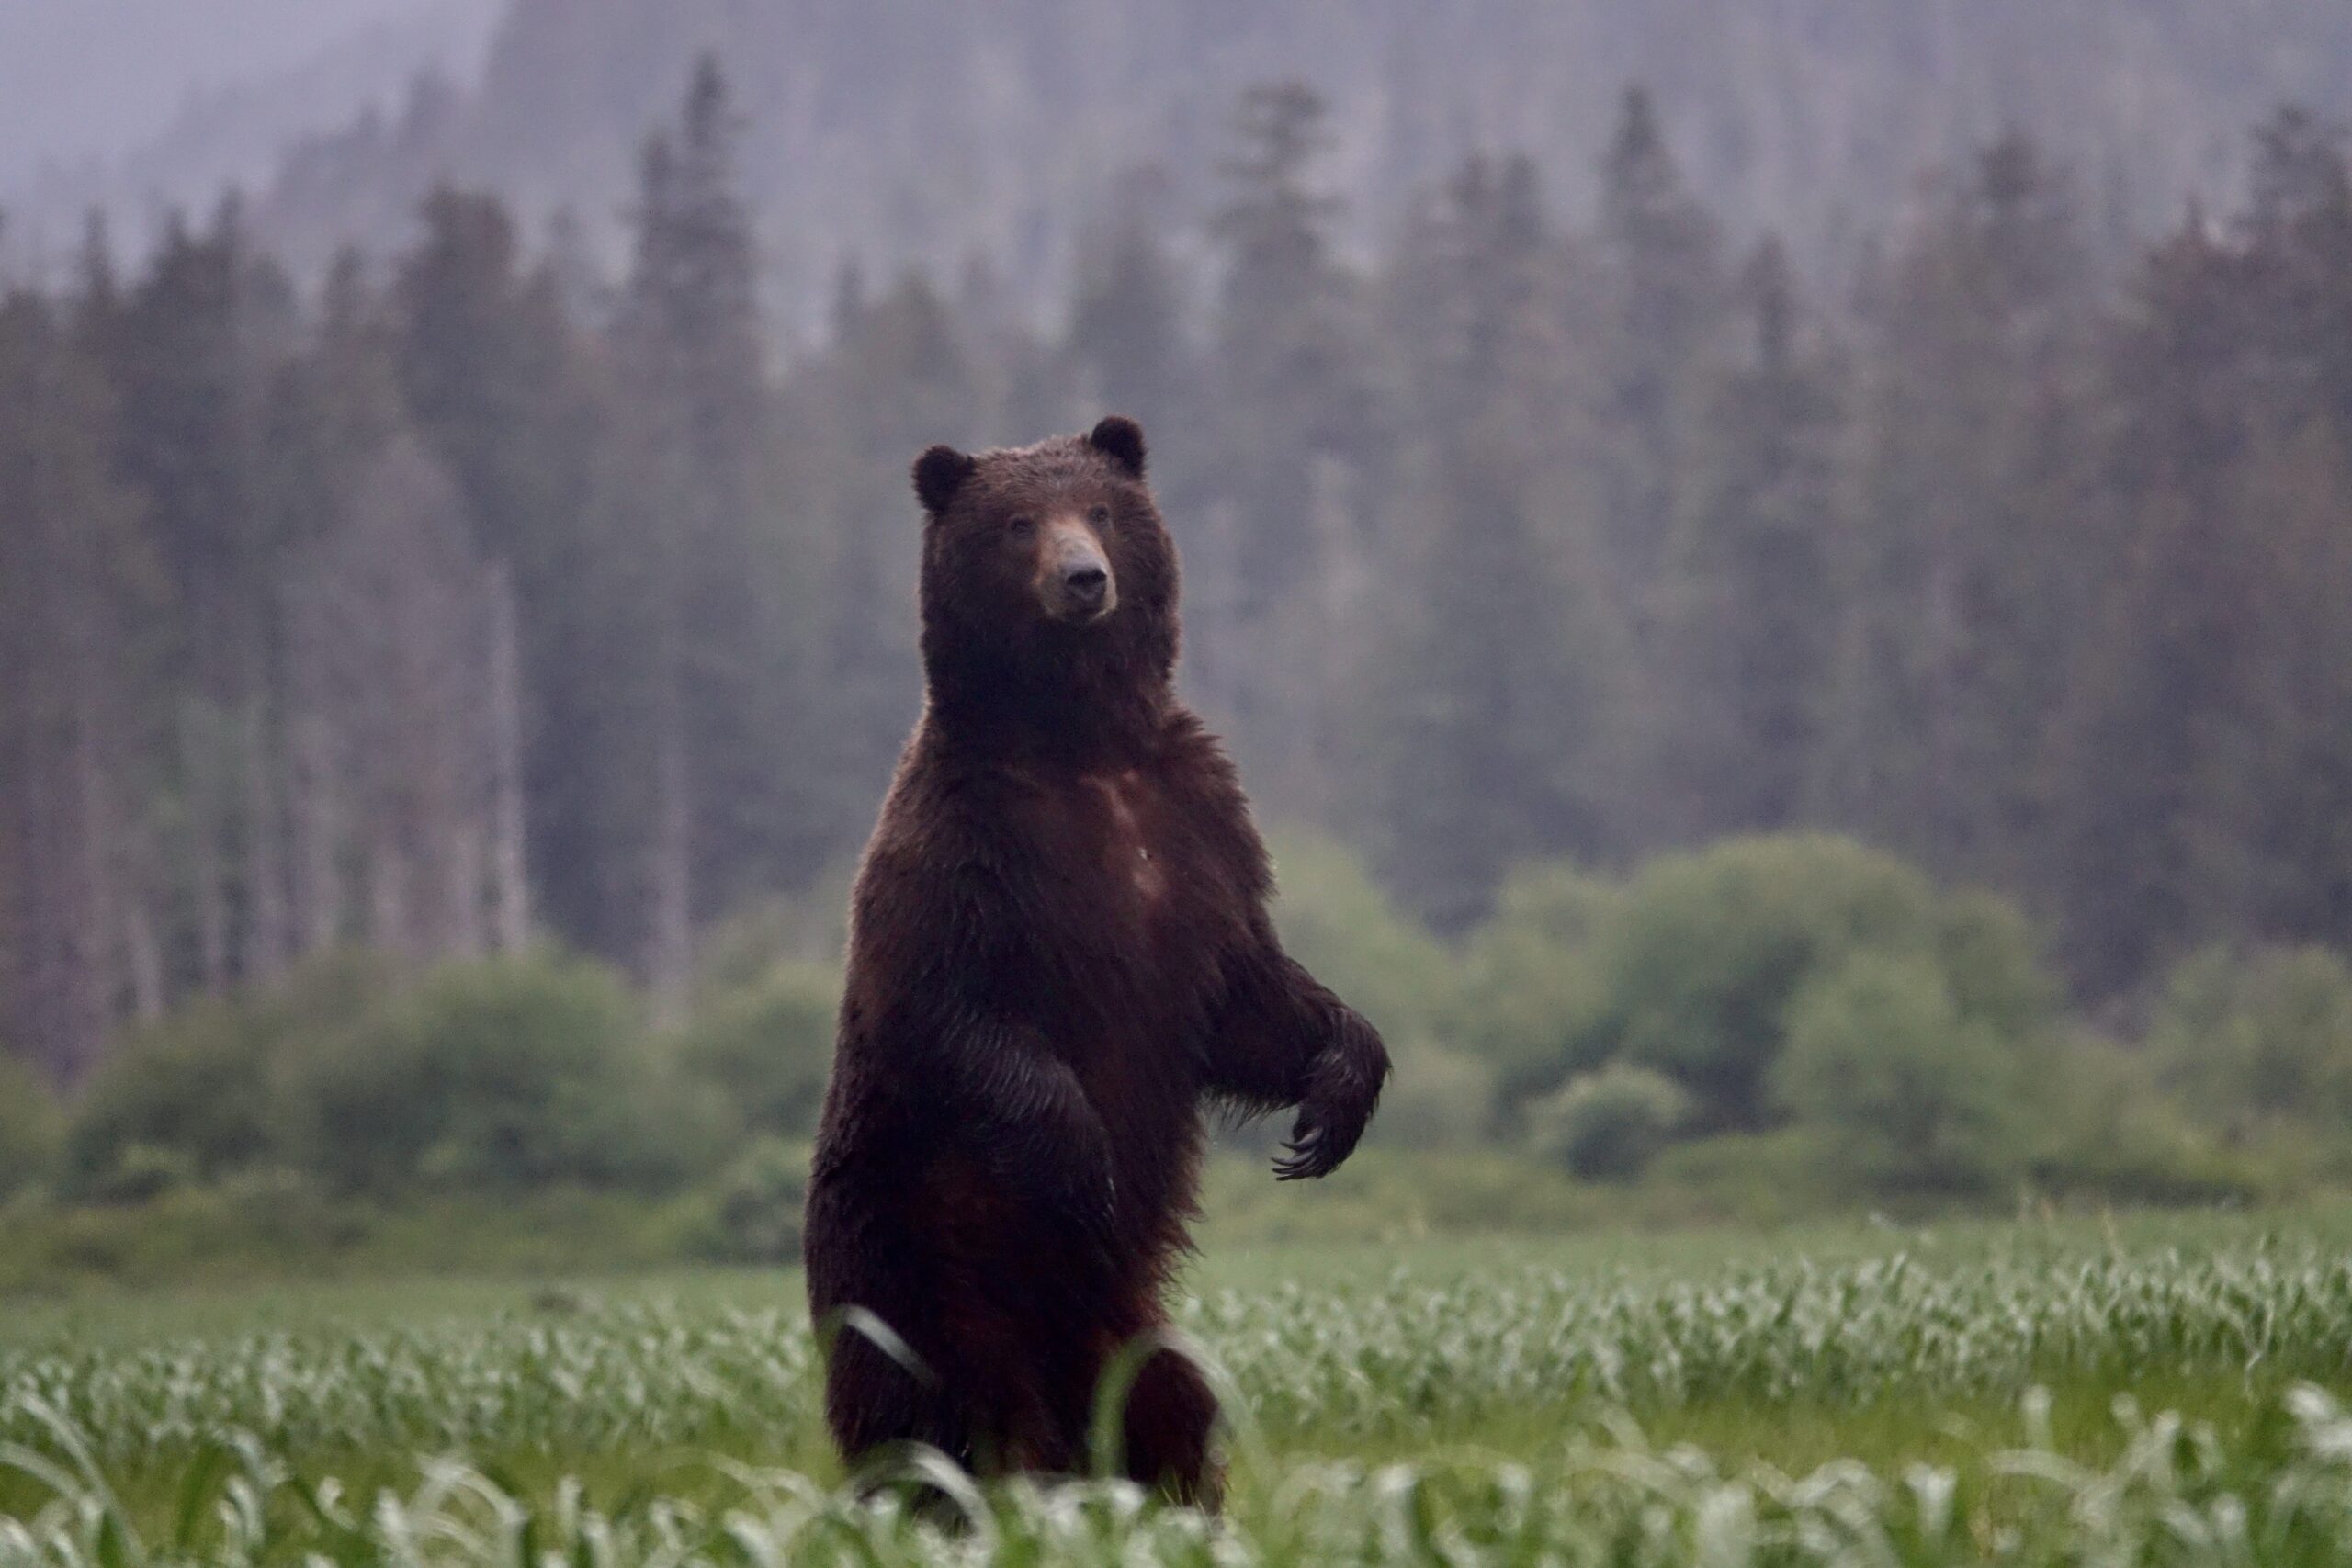 An Alaskan brown bear stands on his hind legs in an open grassy field near a forest.